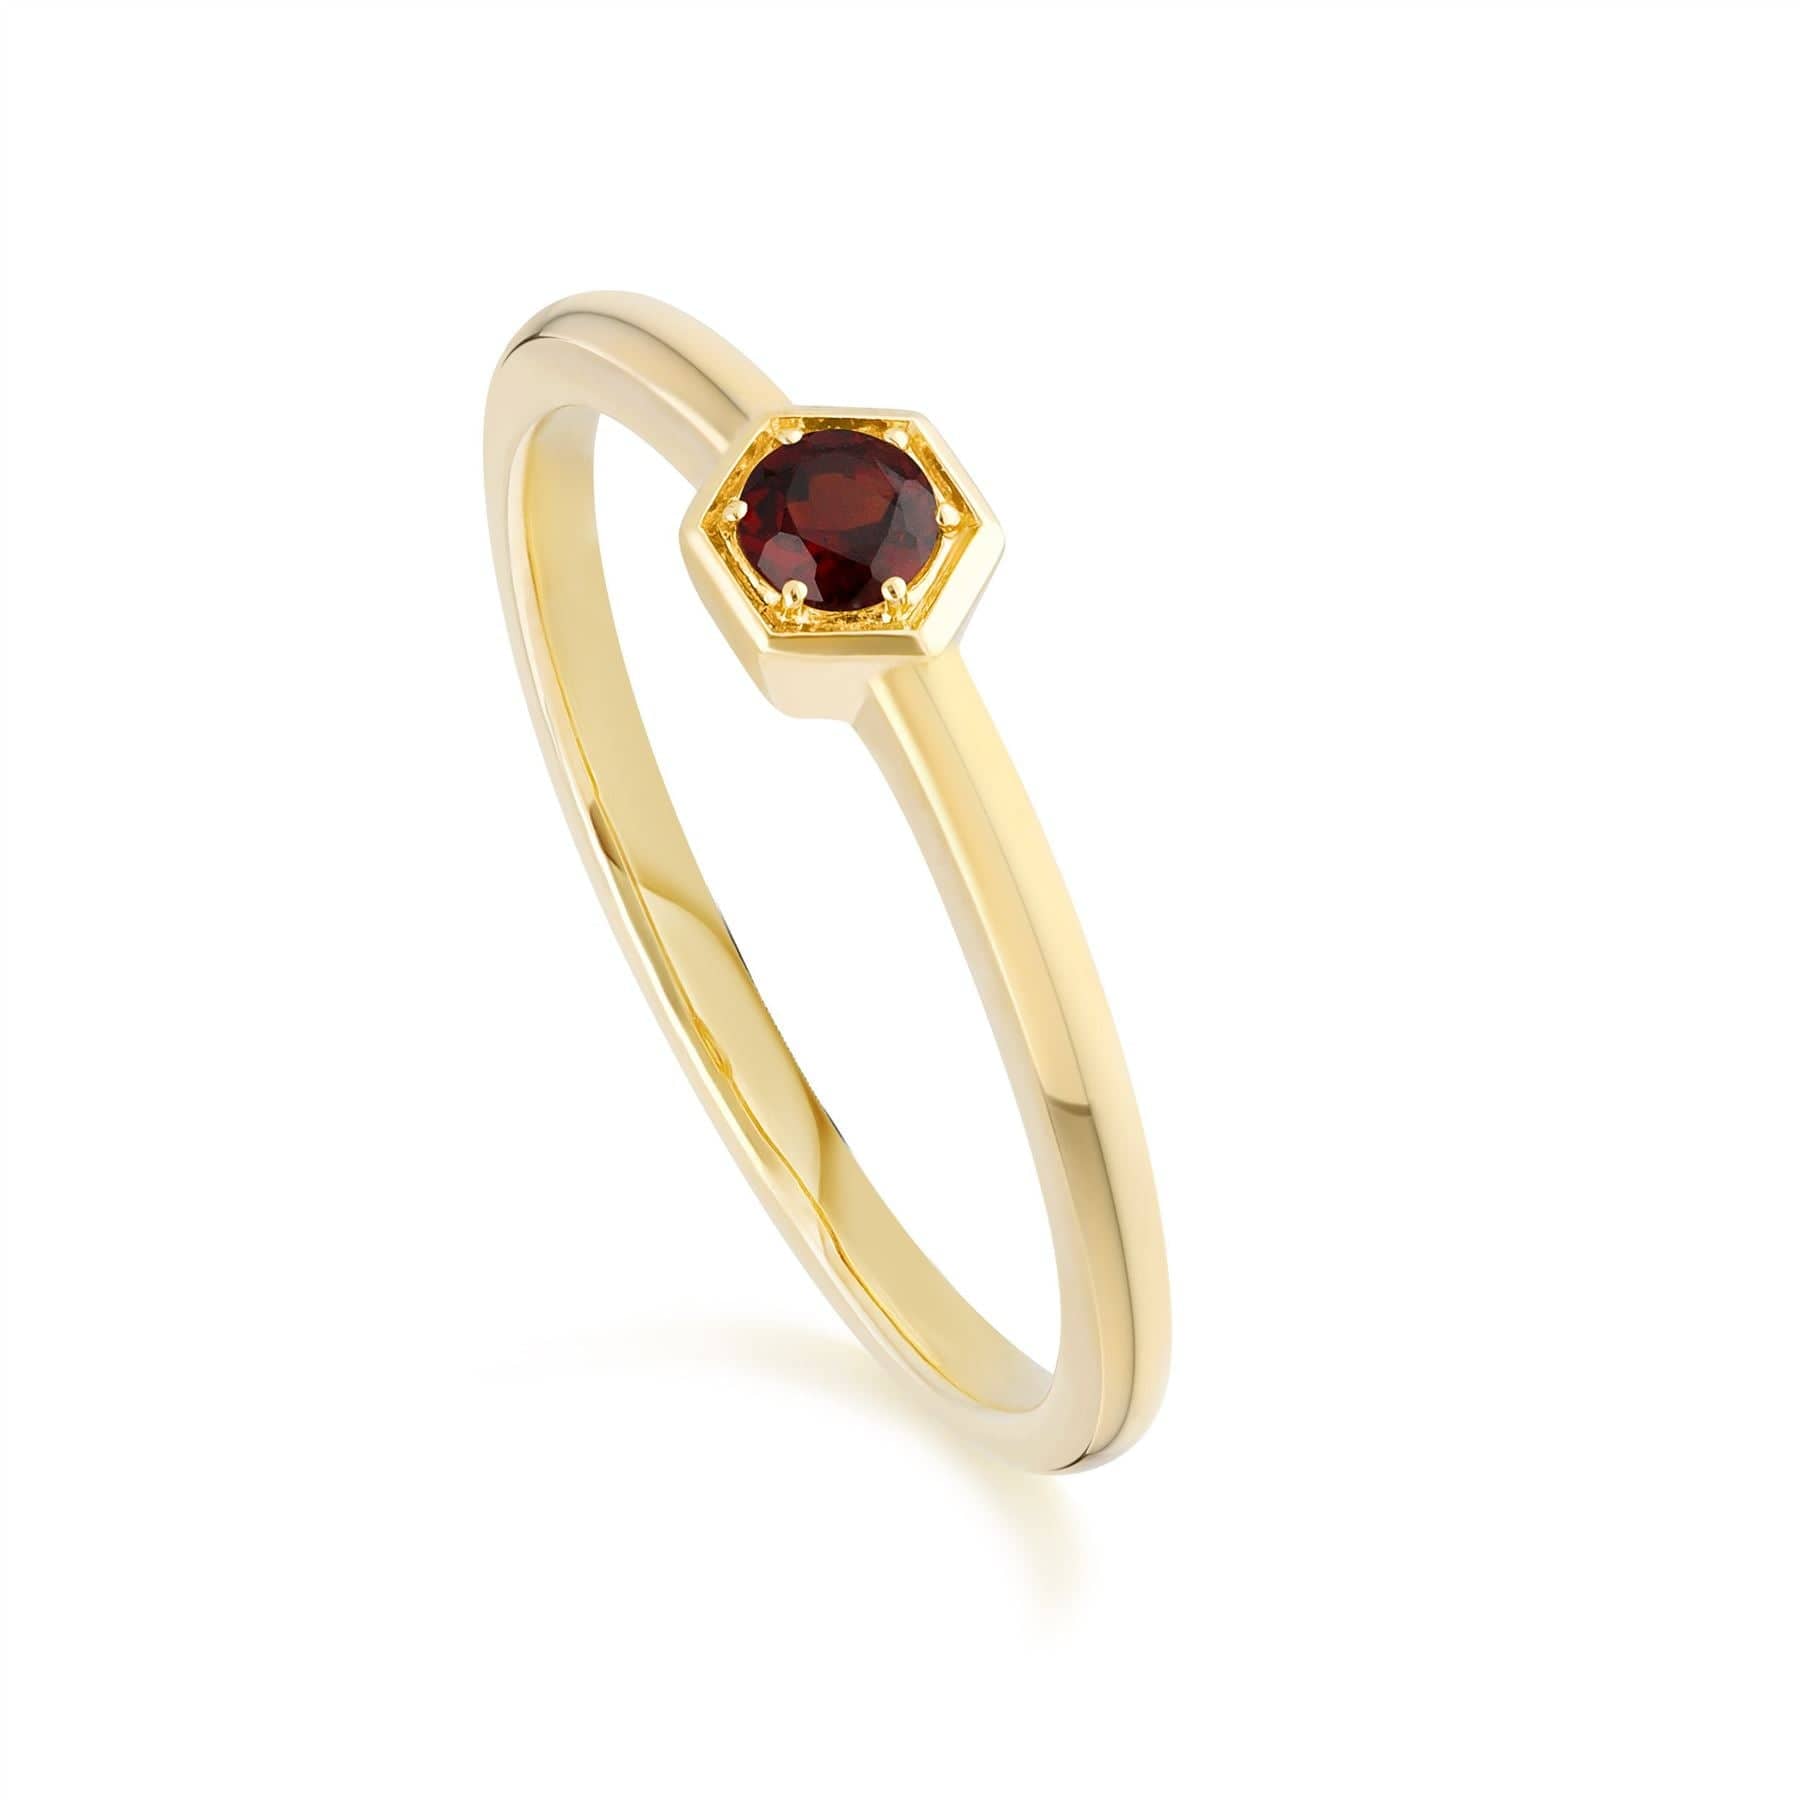 135R1837049 Honeycomb Inspired Garnet Solitaire Ring in 9ct Yellow Gold 1